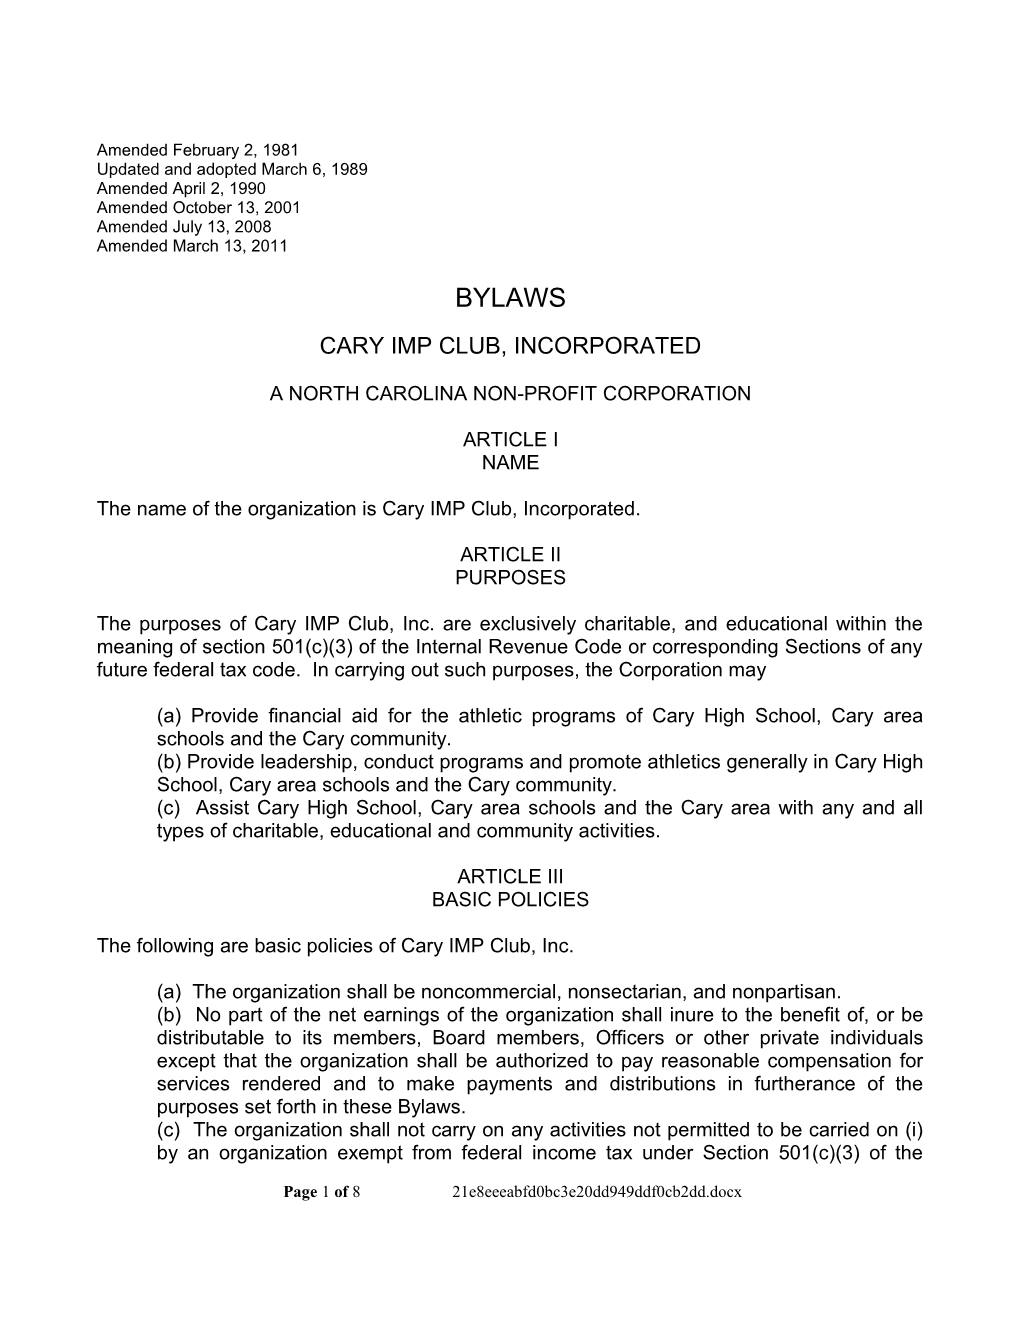 Cary IMP Club Revised Bylaws (00050272)